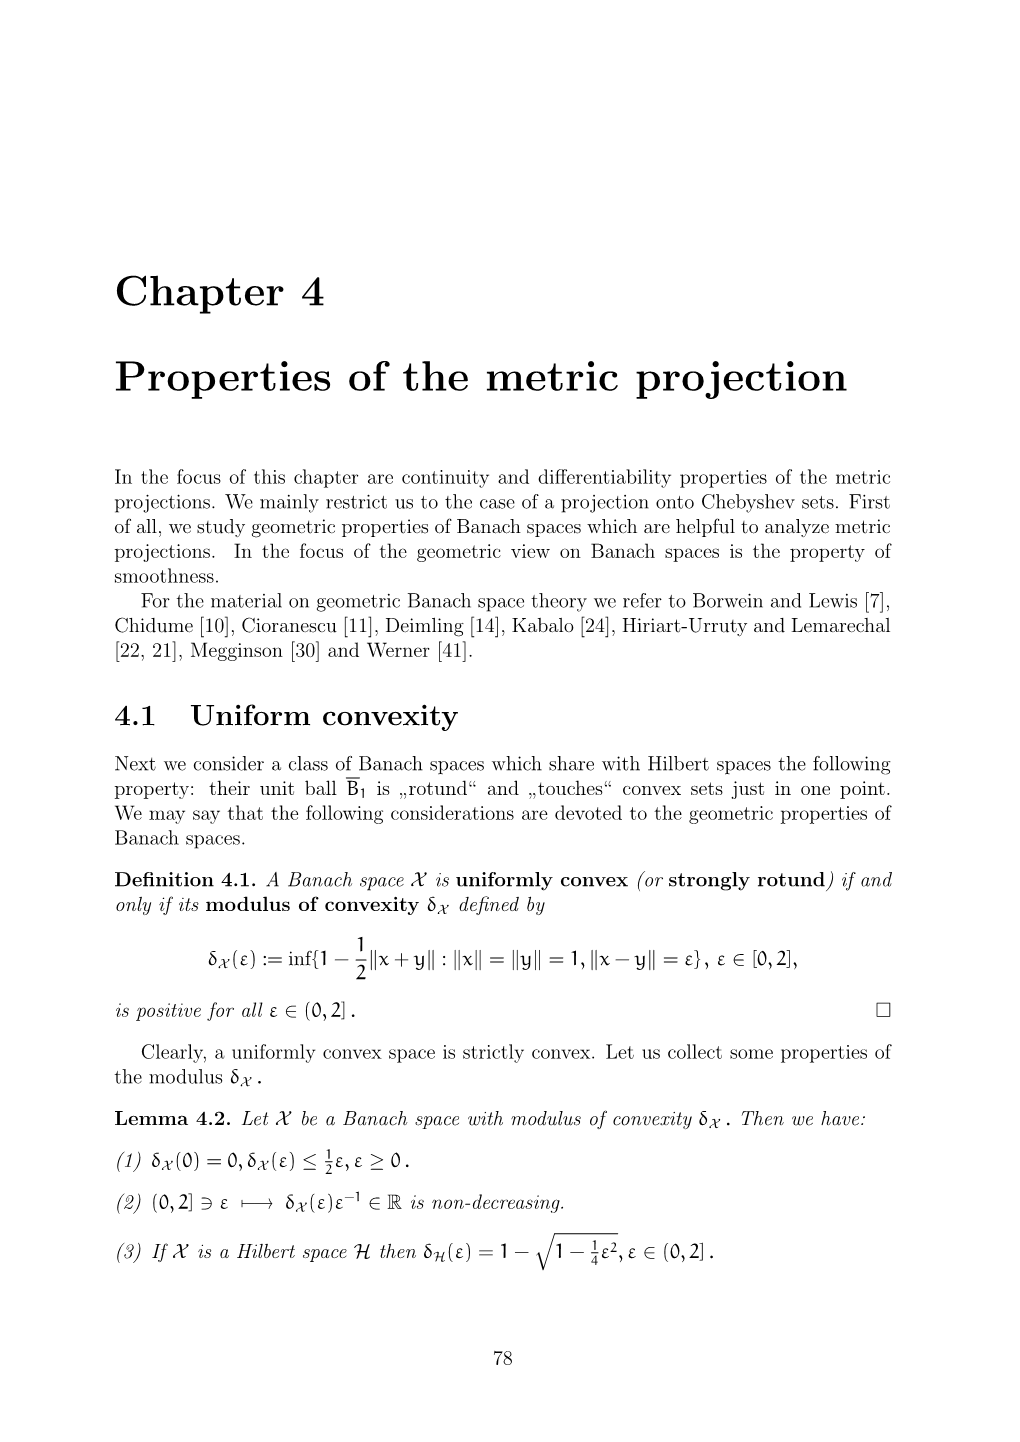 Chapter 4 Properties of the Metric Projection